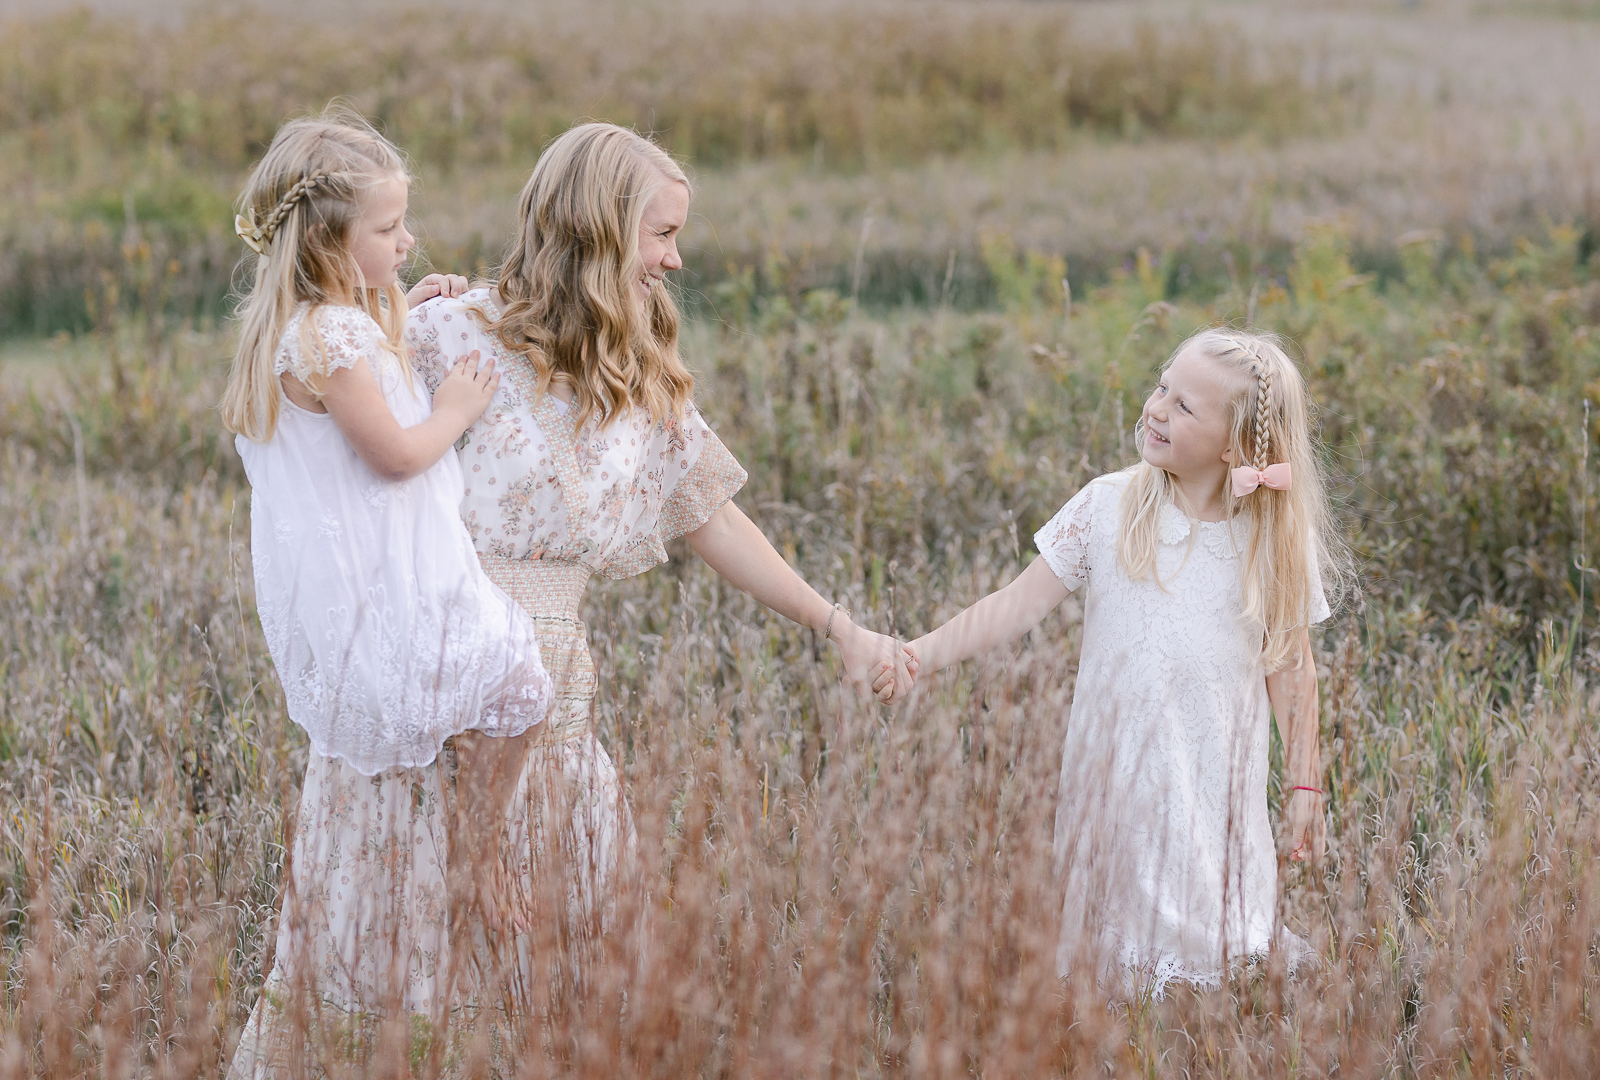 Detroit, Michigan family photographer, Laurel Smith Photography captures a mom holding her two daughter's hands while walking in tall grass. five year old girl white dresses, white Peter-pan collared little girl dress, tall grass family photos, bohemian ivory and white maxi dress for family pictures, little girl braids and bows, professional detroit michigan photographer #DetroitMichiganFamilyPhotographer #DetroitMichiganPhotographer #FamilyPhotoOutfitInspiration #PlymouthMichiganFamilyPhotographer #PlymouthMichiganPhotographer #ExtendedFamilyPhotos #DetroitMichiganFallFamilyPhotos #LetThemBeLittle #LetTheKids #DetroitMichiganLifestylePhotographer